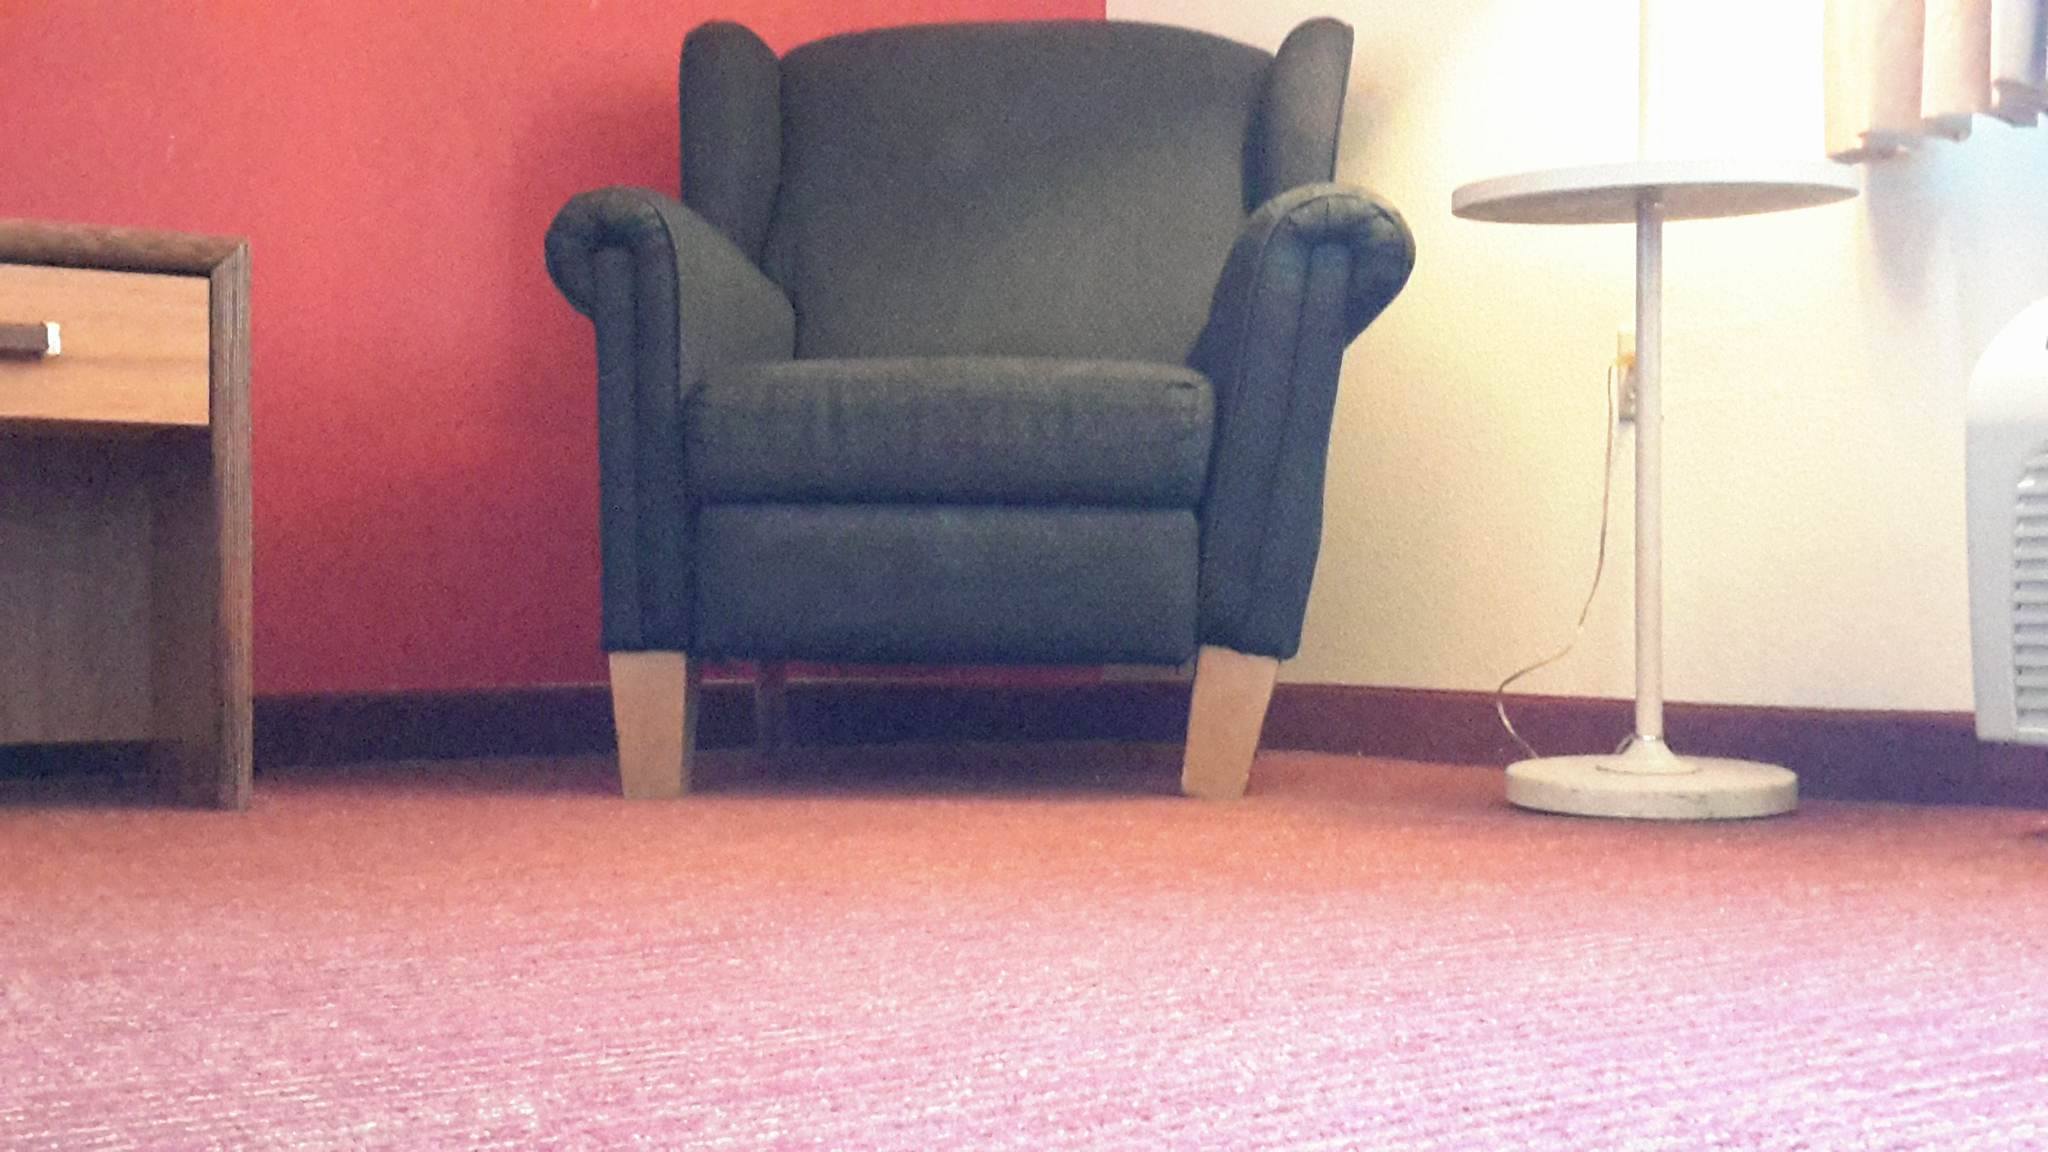 This Hotel Doesn’t Have A Leg To Stand On